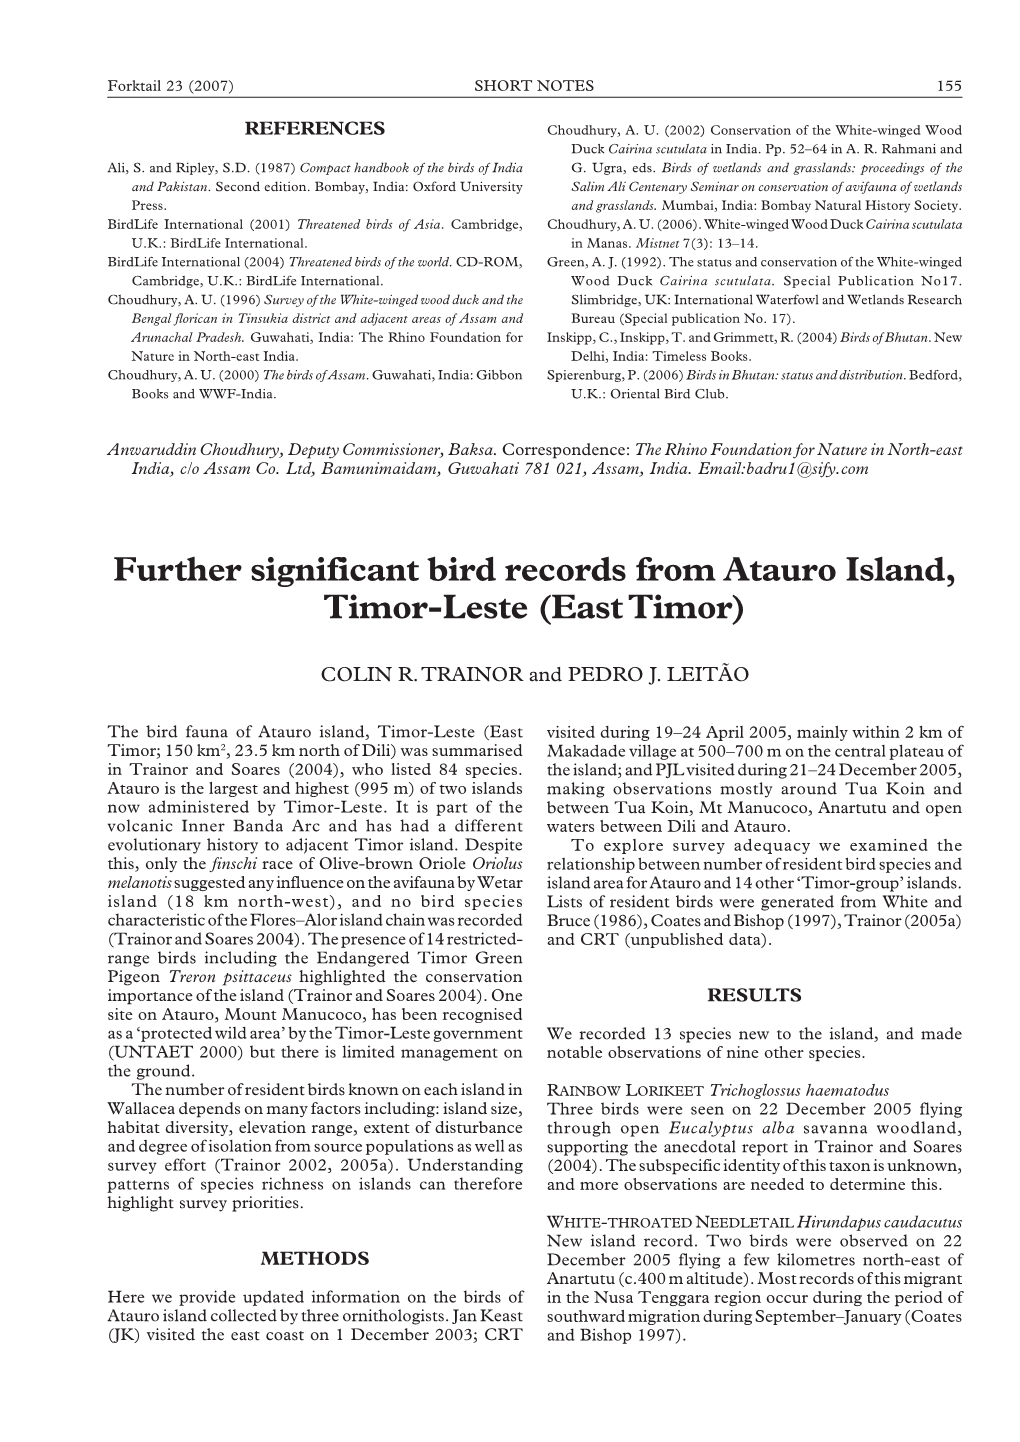 Further Significant Bird Records from Atauro Island, Timor-Leste (East Timor)